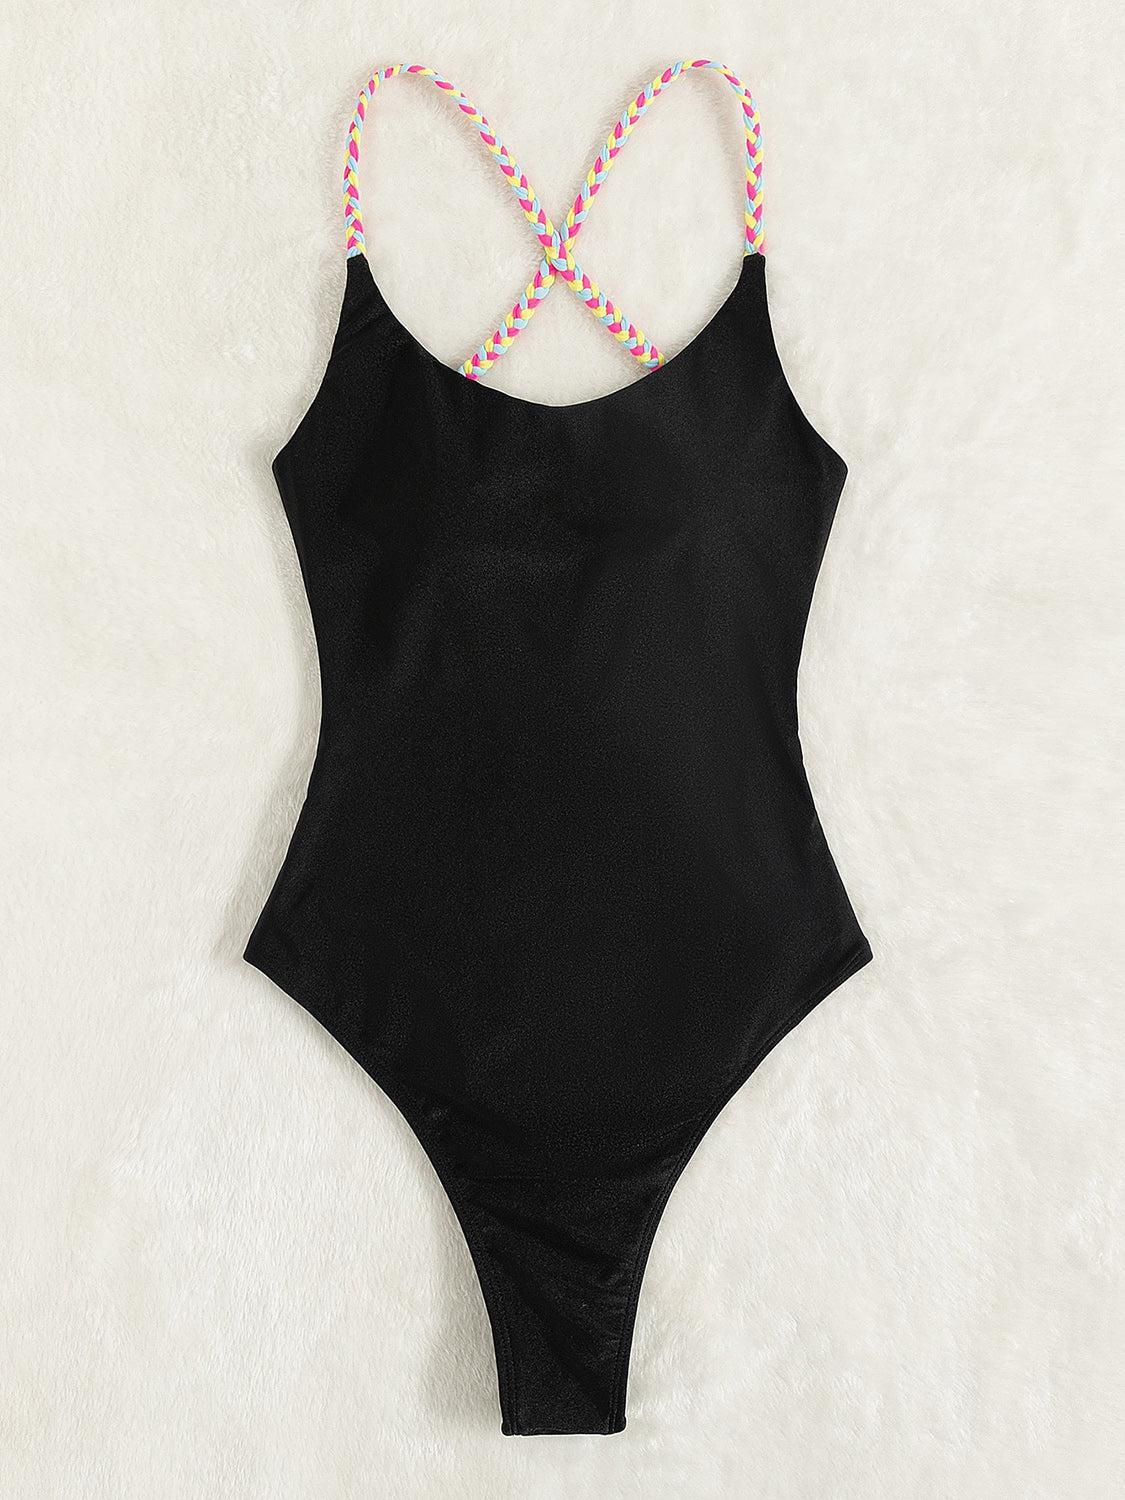 a black one piece swimsuit with pink and white beads